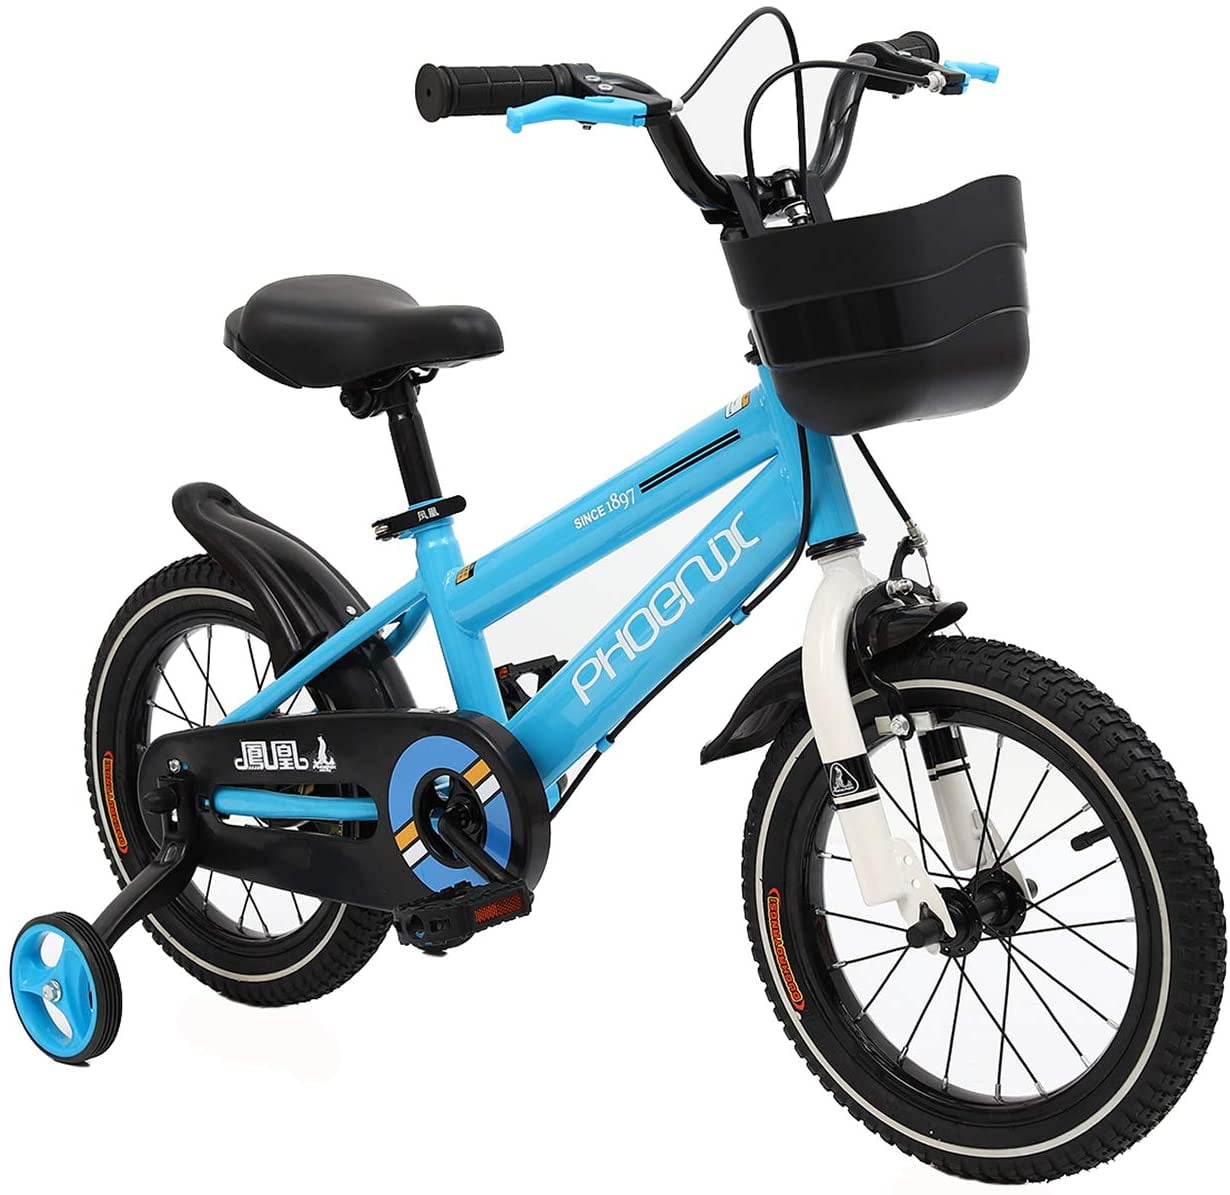 New in Box 12 inch Boys Bike Blue with Training Wheels Kids Toddlers 